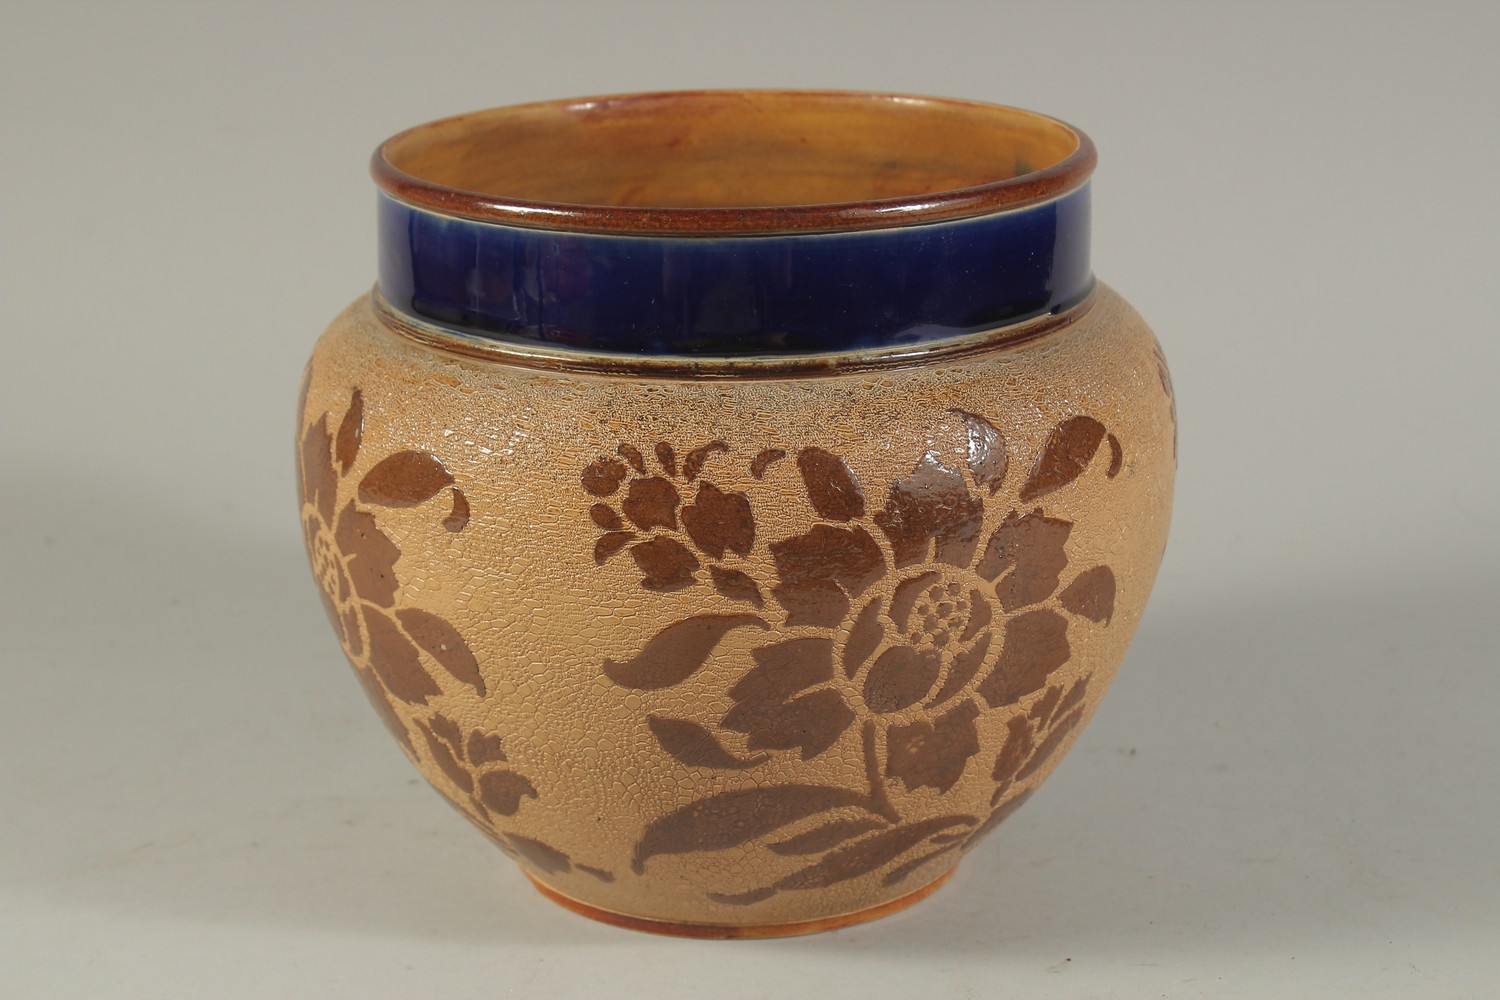 A ROYAL DOULTON SLATERS PATENT STONEWARE CIRCULAR JARDINIERE with blue rim, the body with leaves. - Image 3 of 5